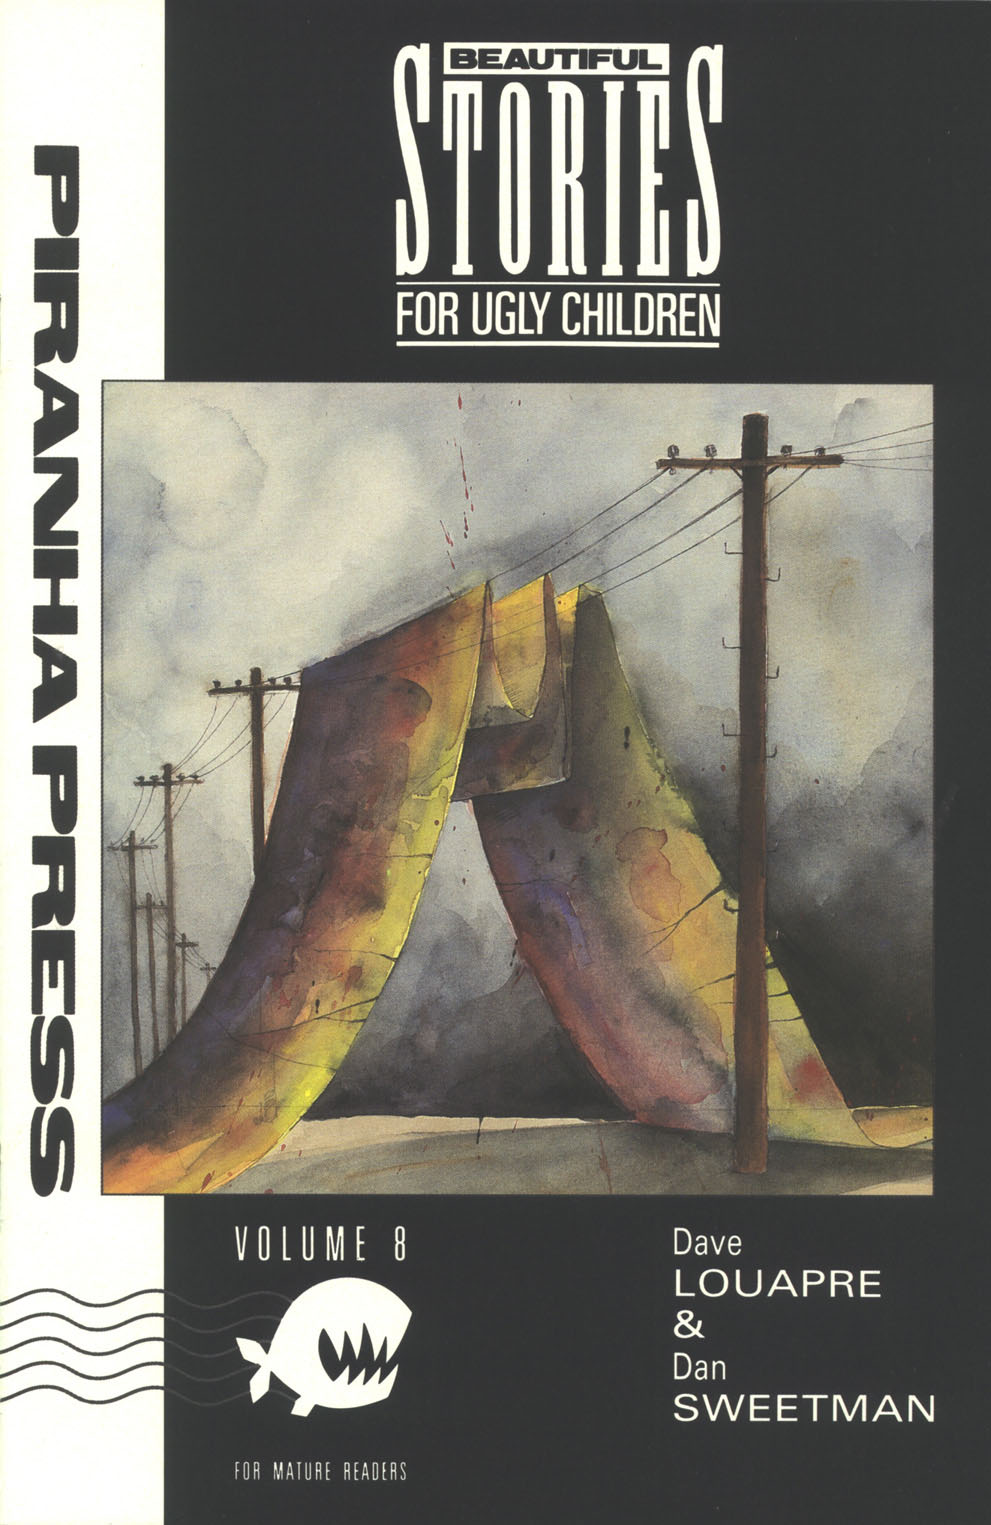 Read online Beautiful Stories For Ugly Children comic -  Issue #8 - 1